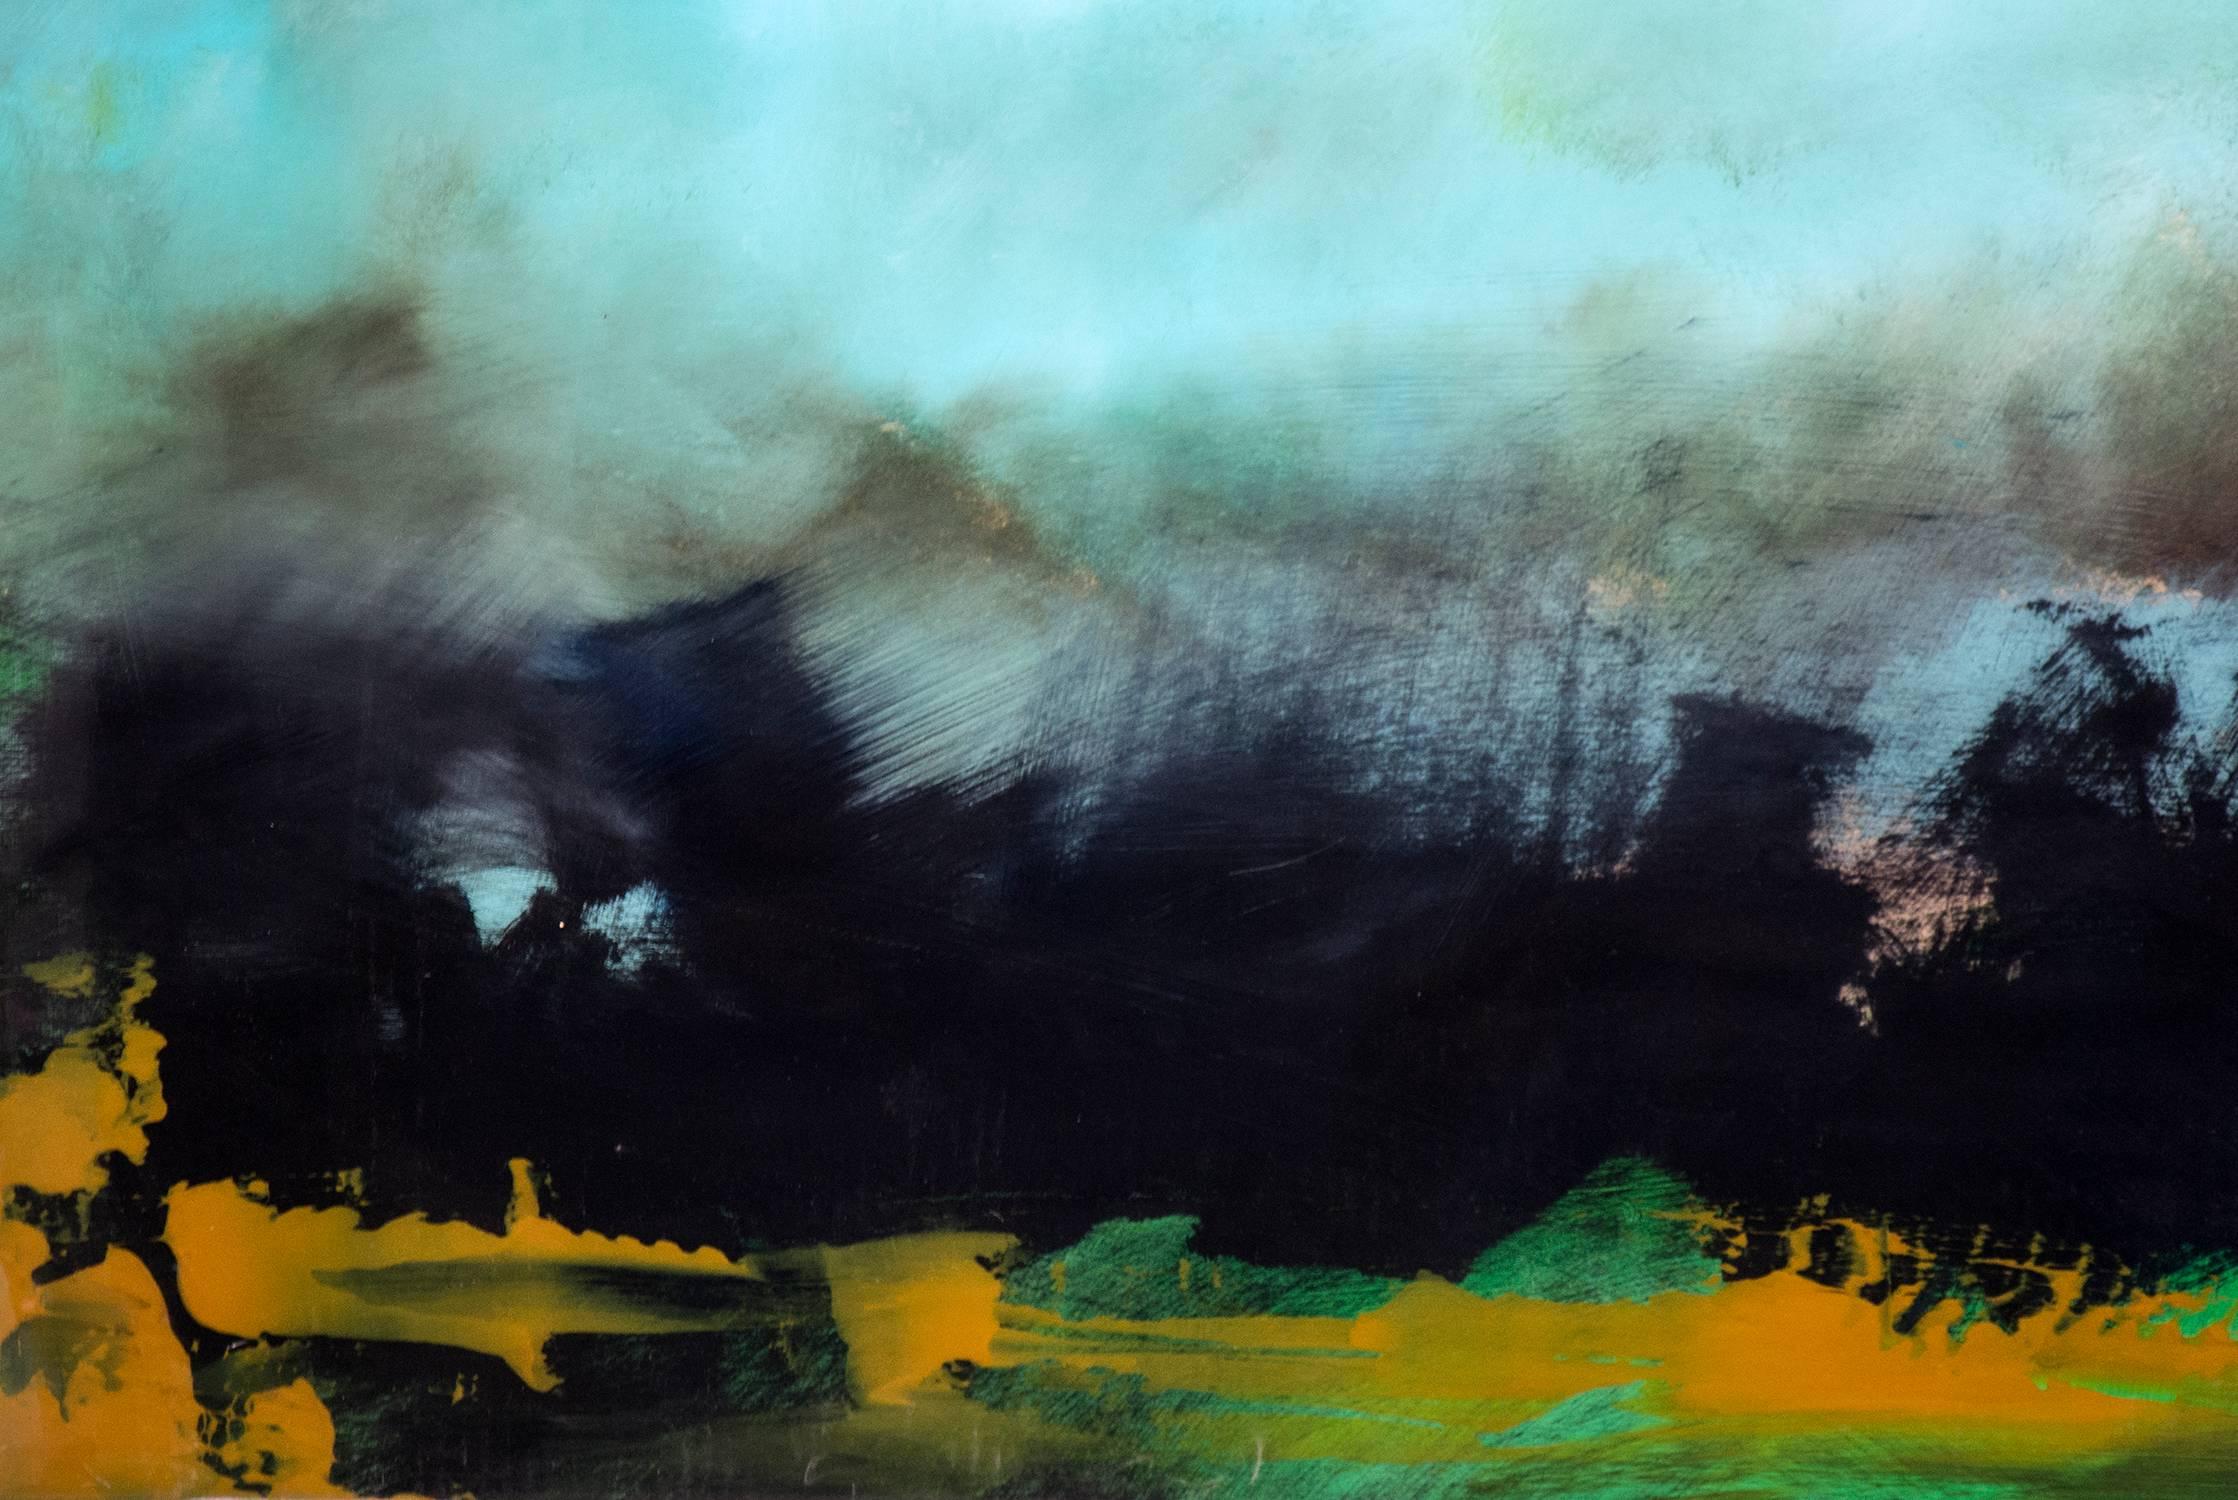 Rujuh 5 - atmospheric, colourful, abstract landscape, acrylic, resin on panel - Painting by Jay Hodgins